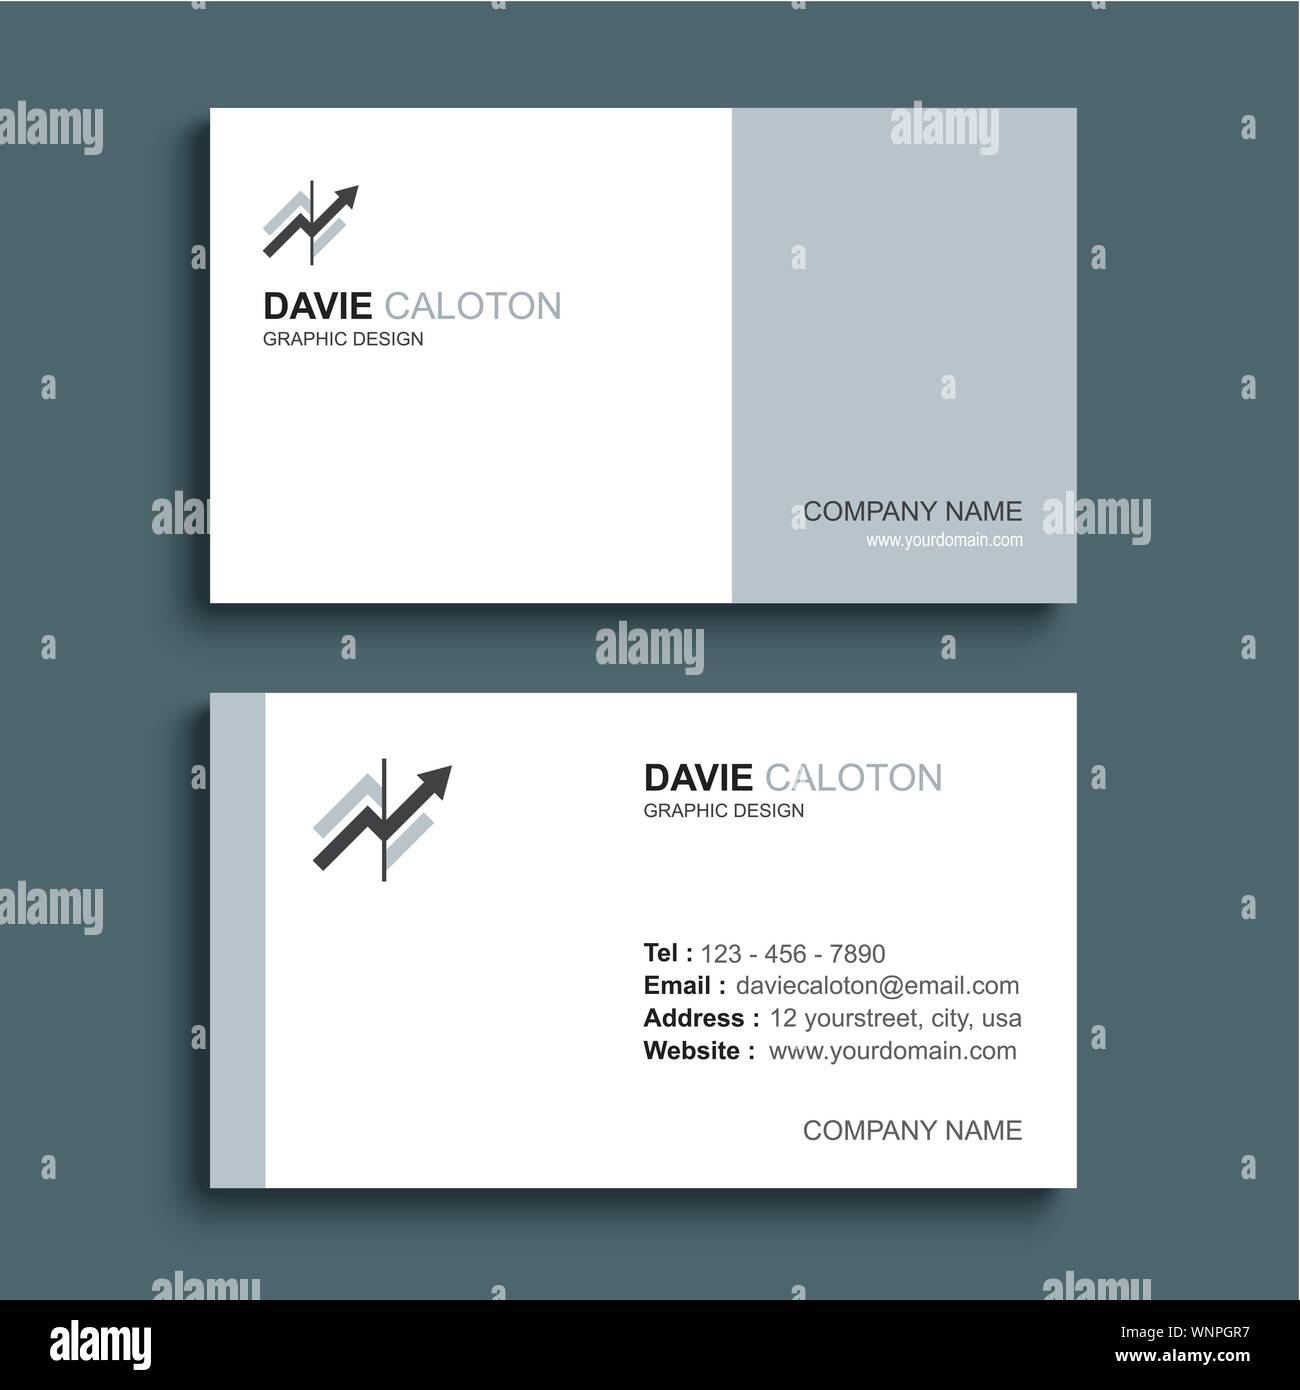 Minimal business card print template design. Gray pastel color and simple clean layout. Stock Vector